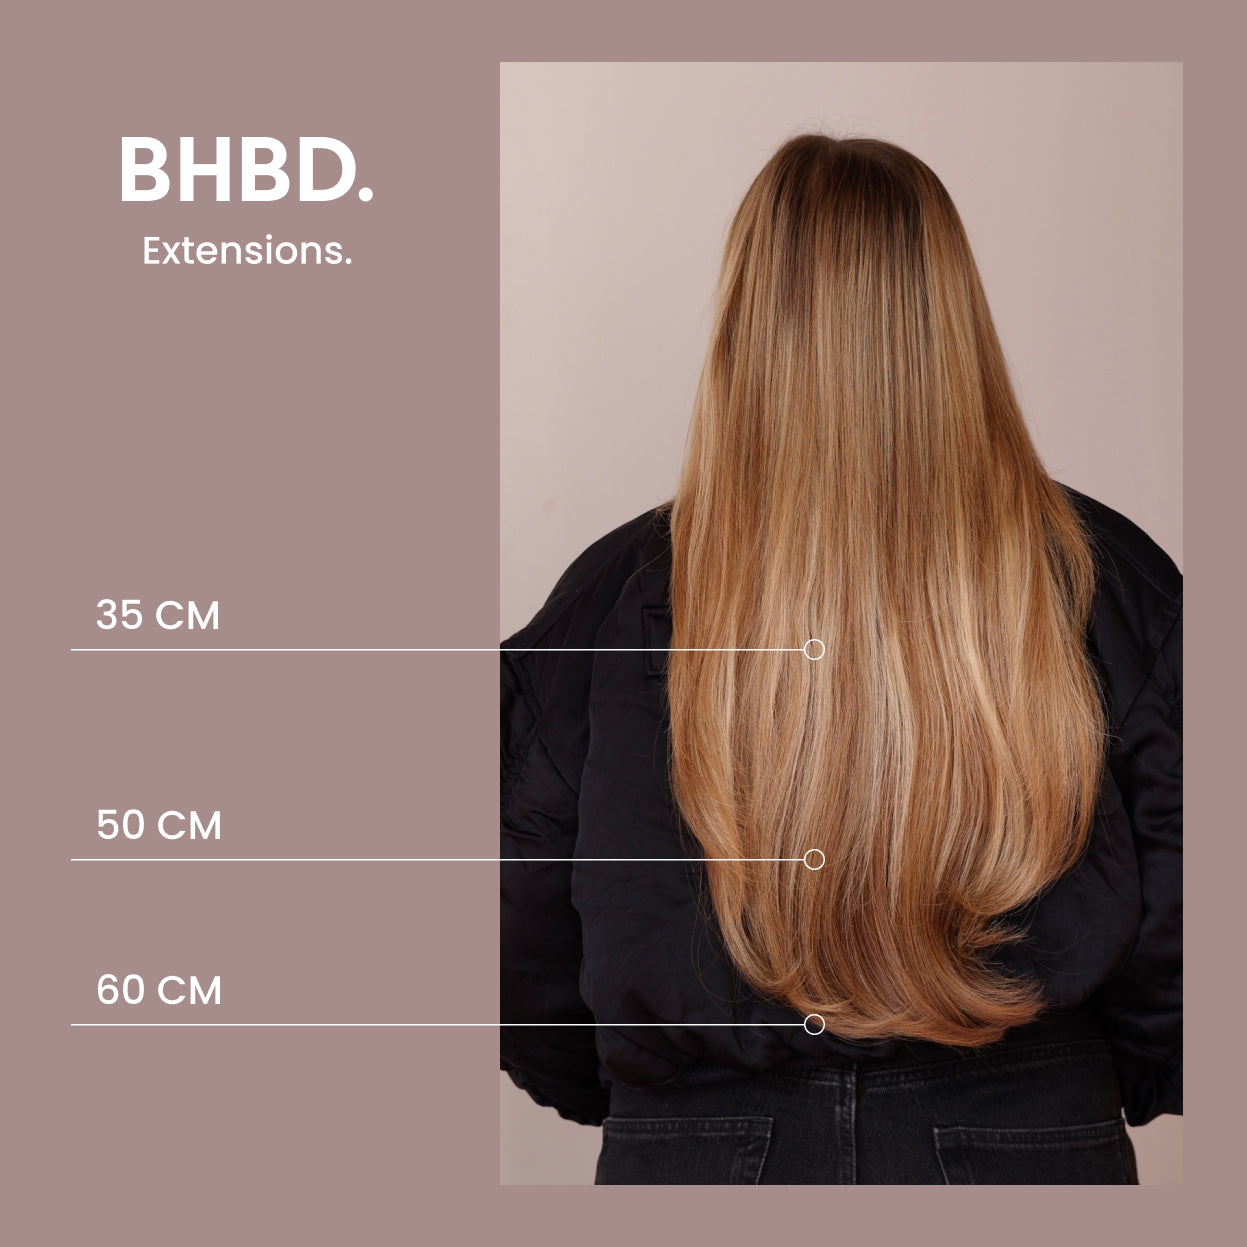 BHBD tape extensions length guide